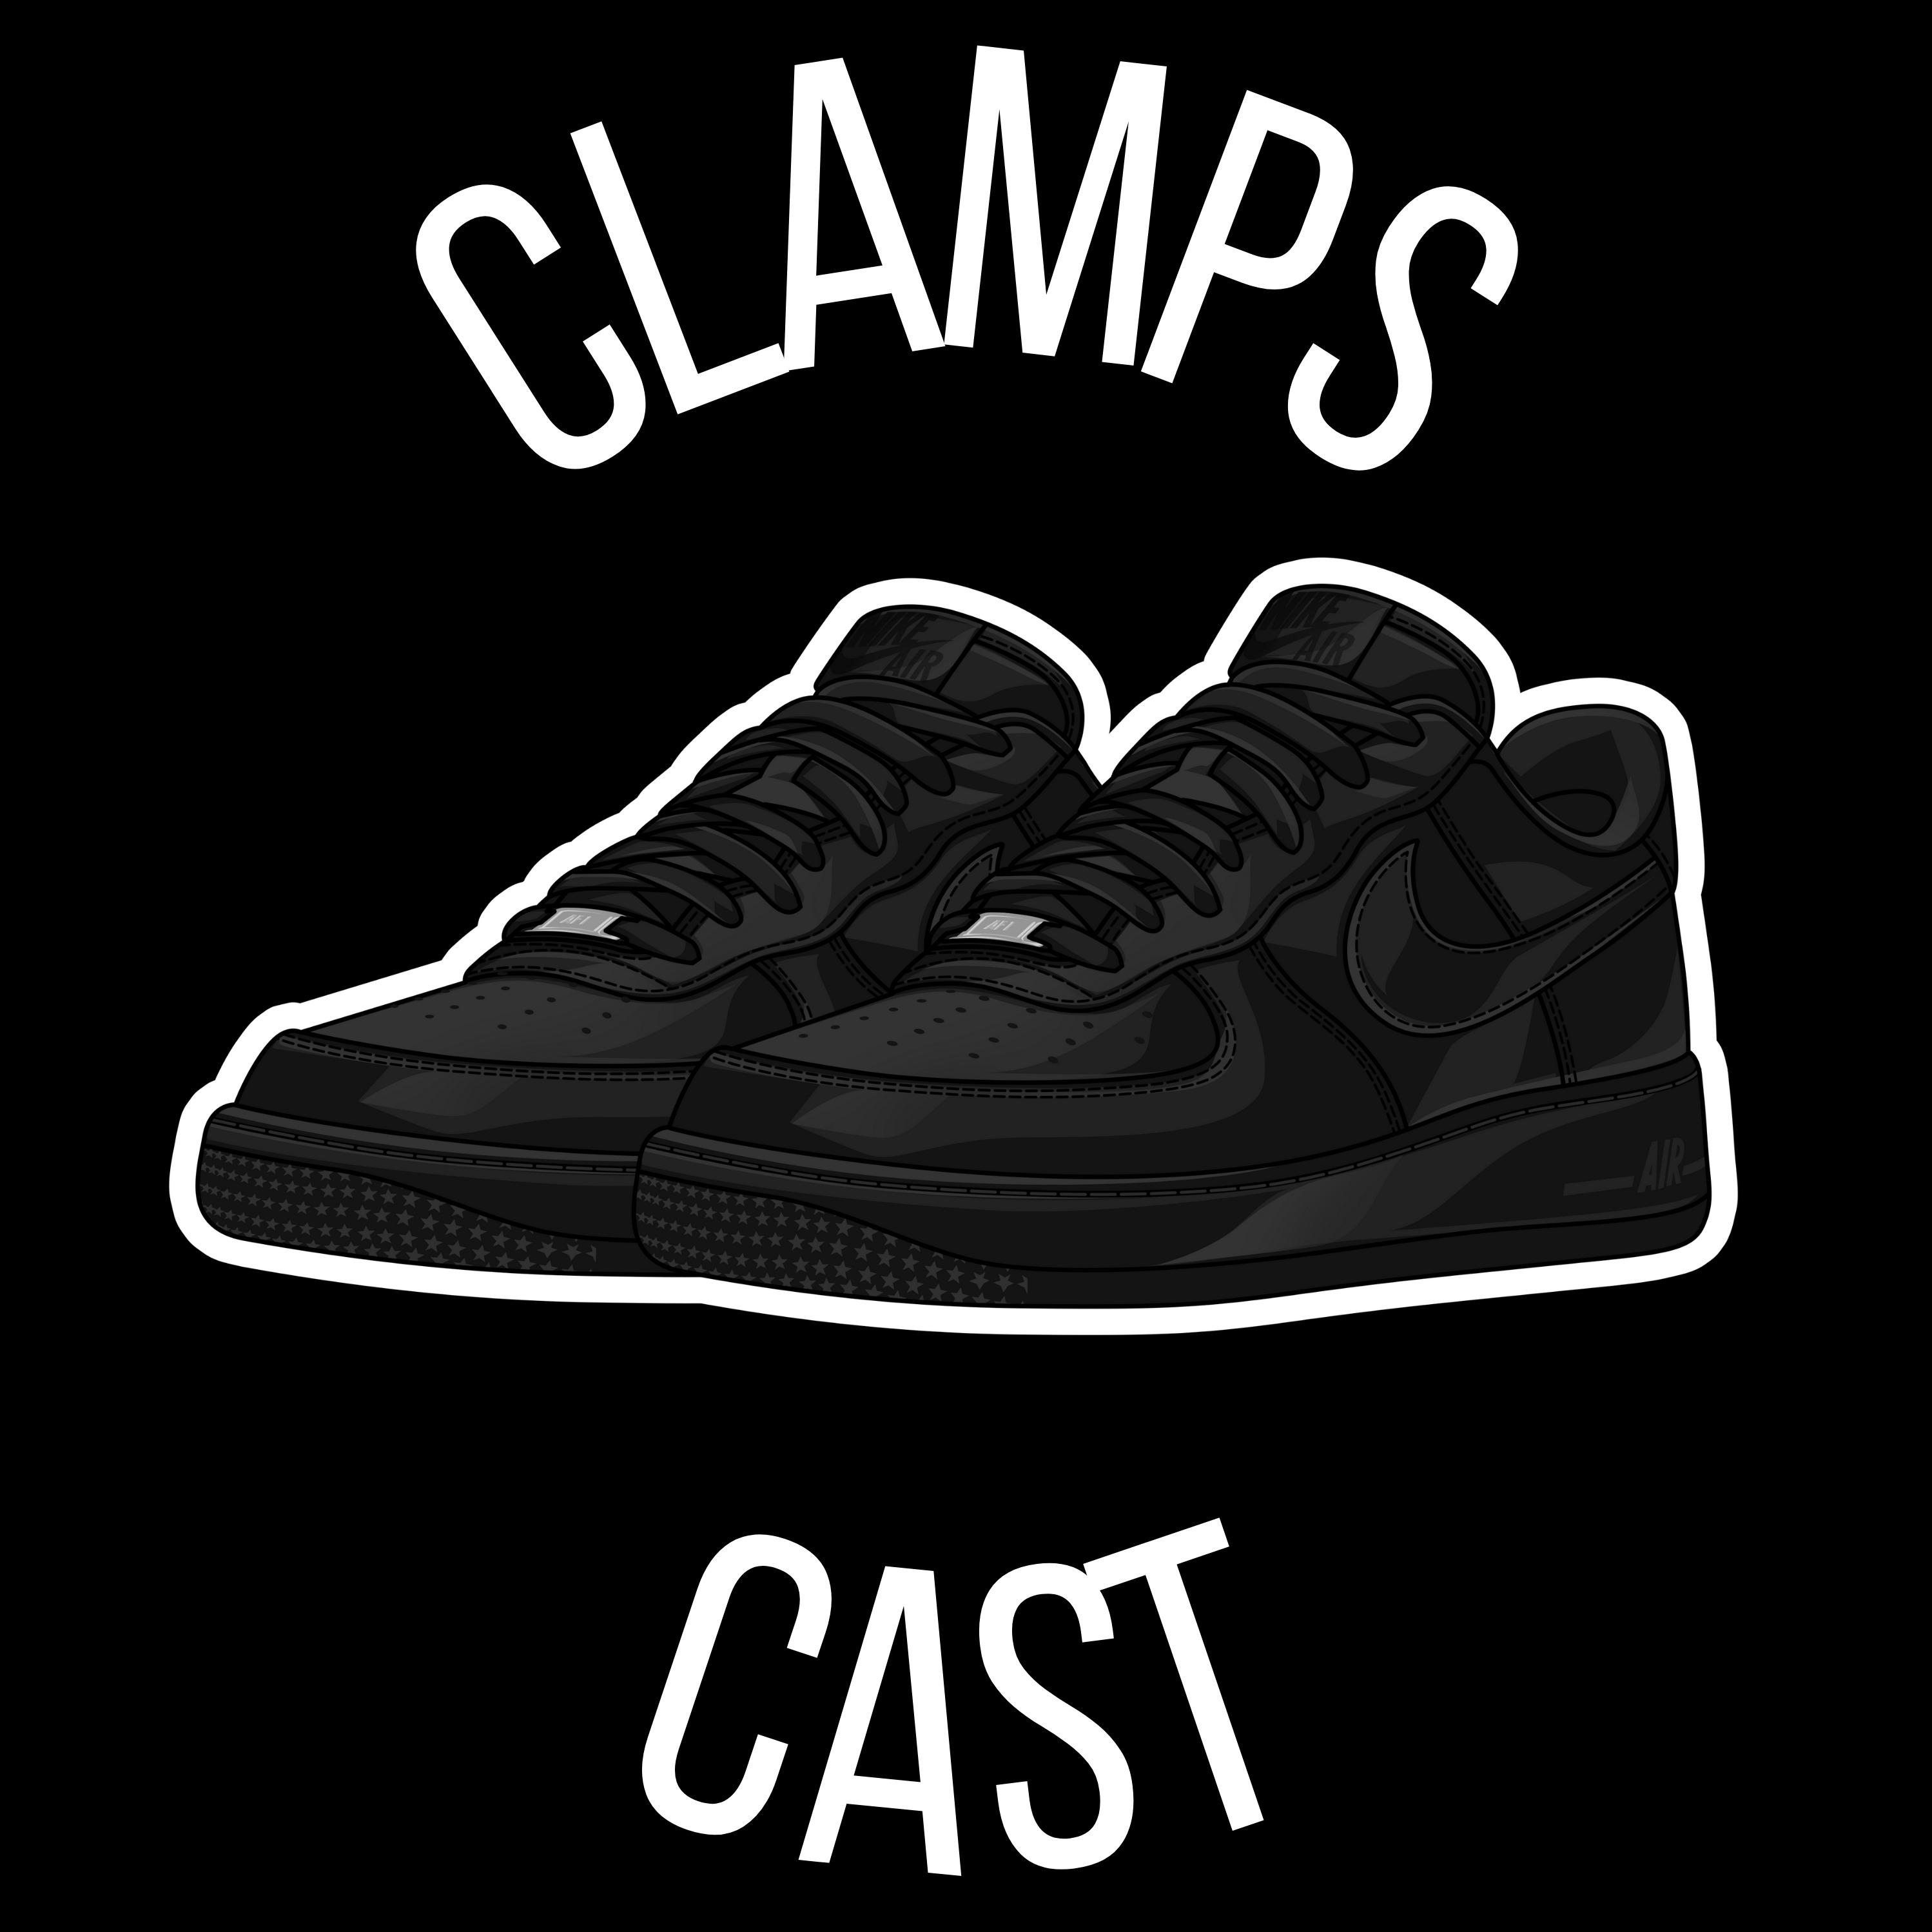 The Clamps Cast